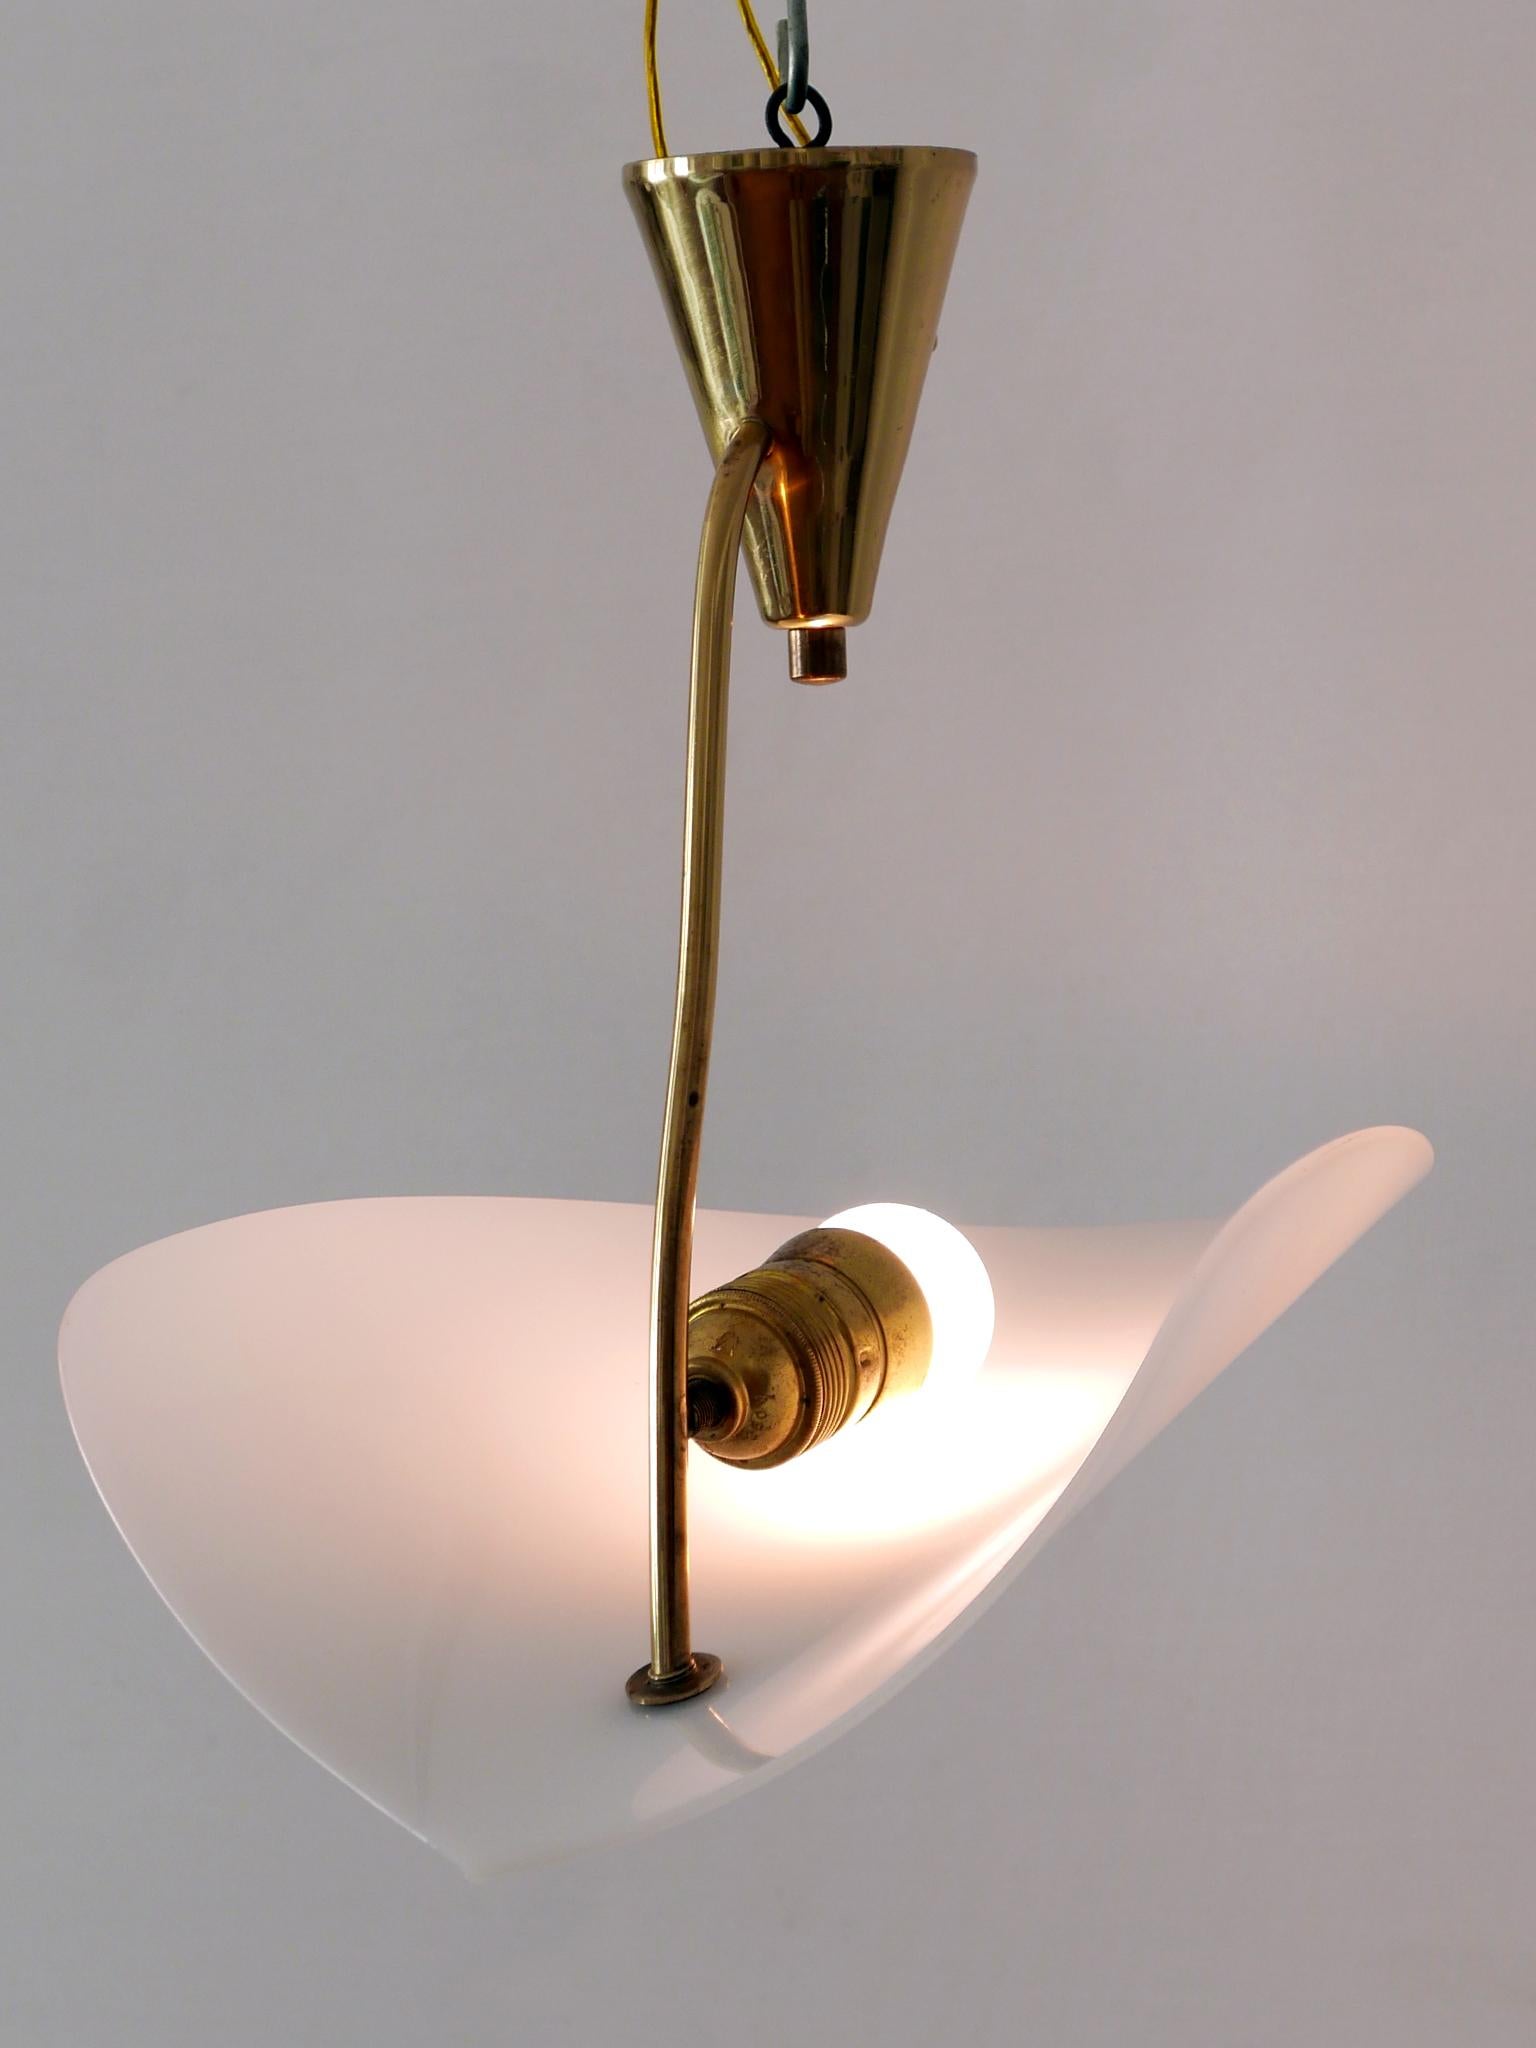 Extremely Rare and Elegant Lucite & Brass Ceiling Lamp Germany 1960s For Sale 9